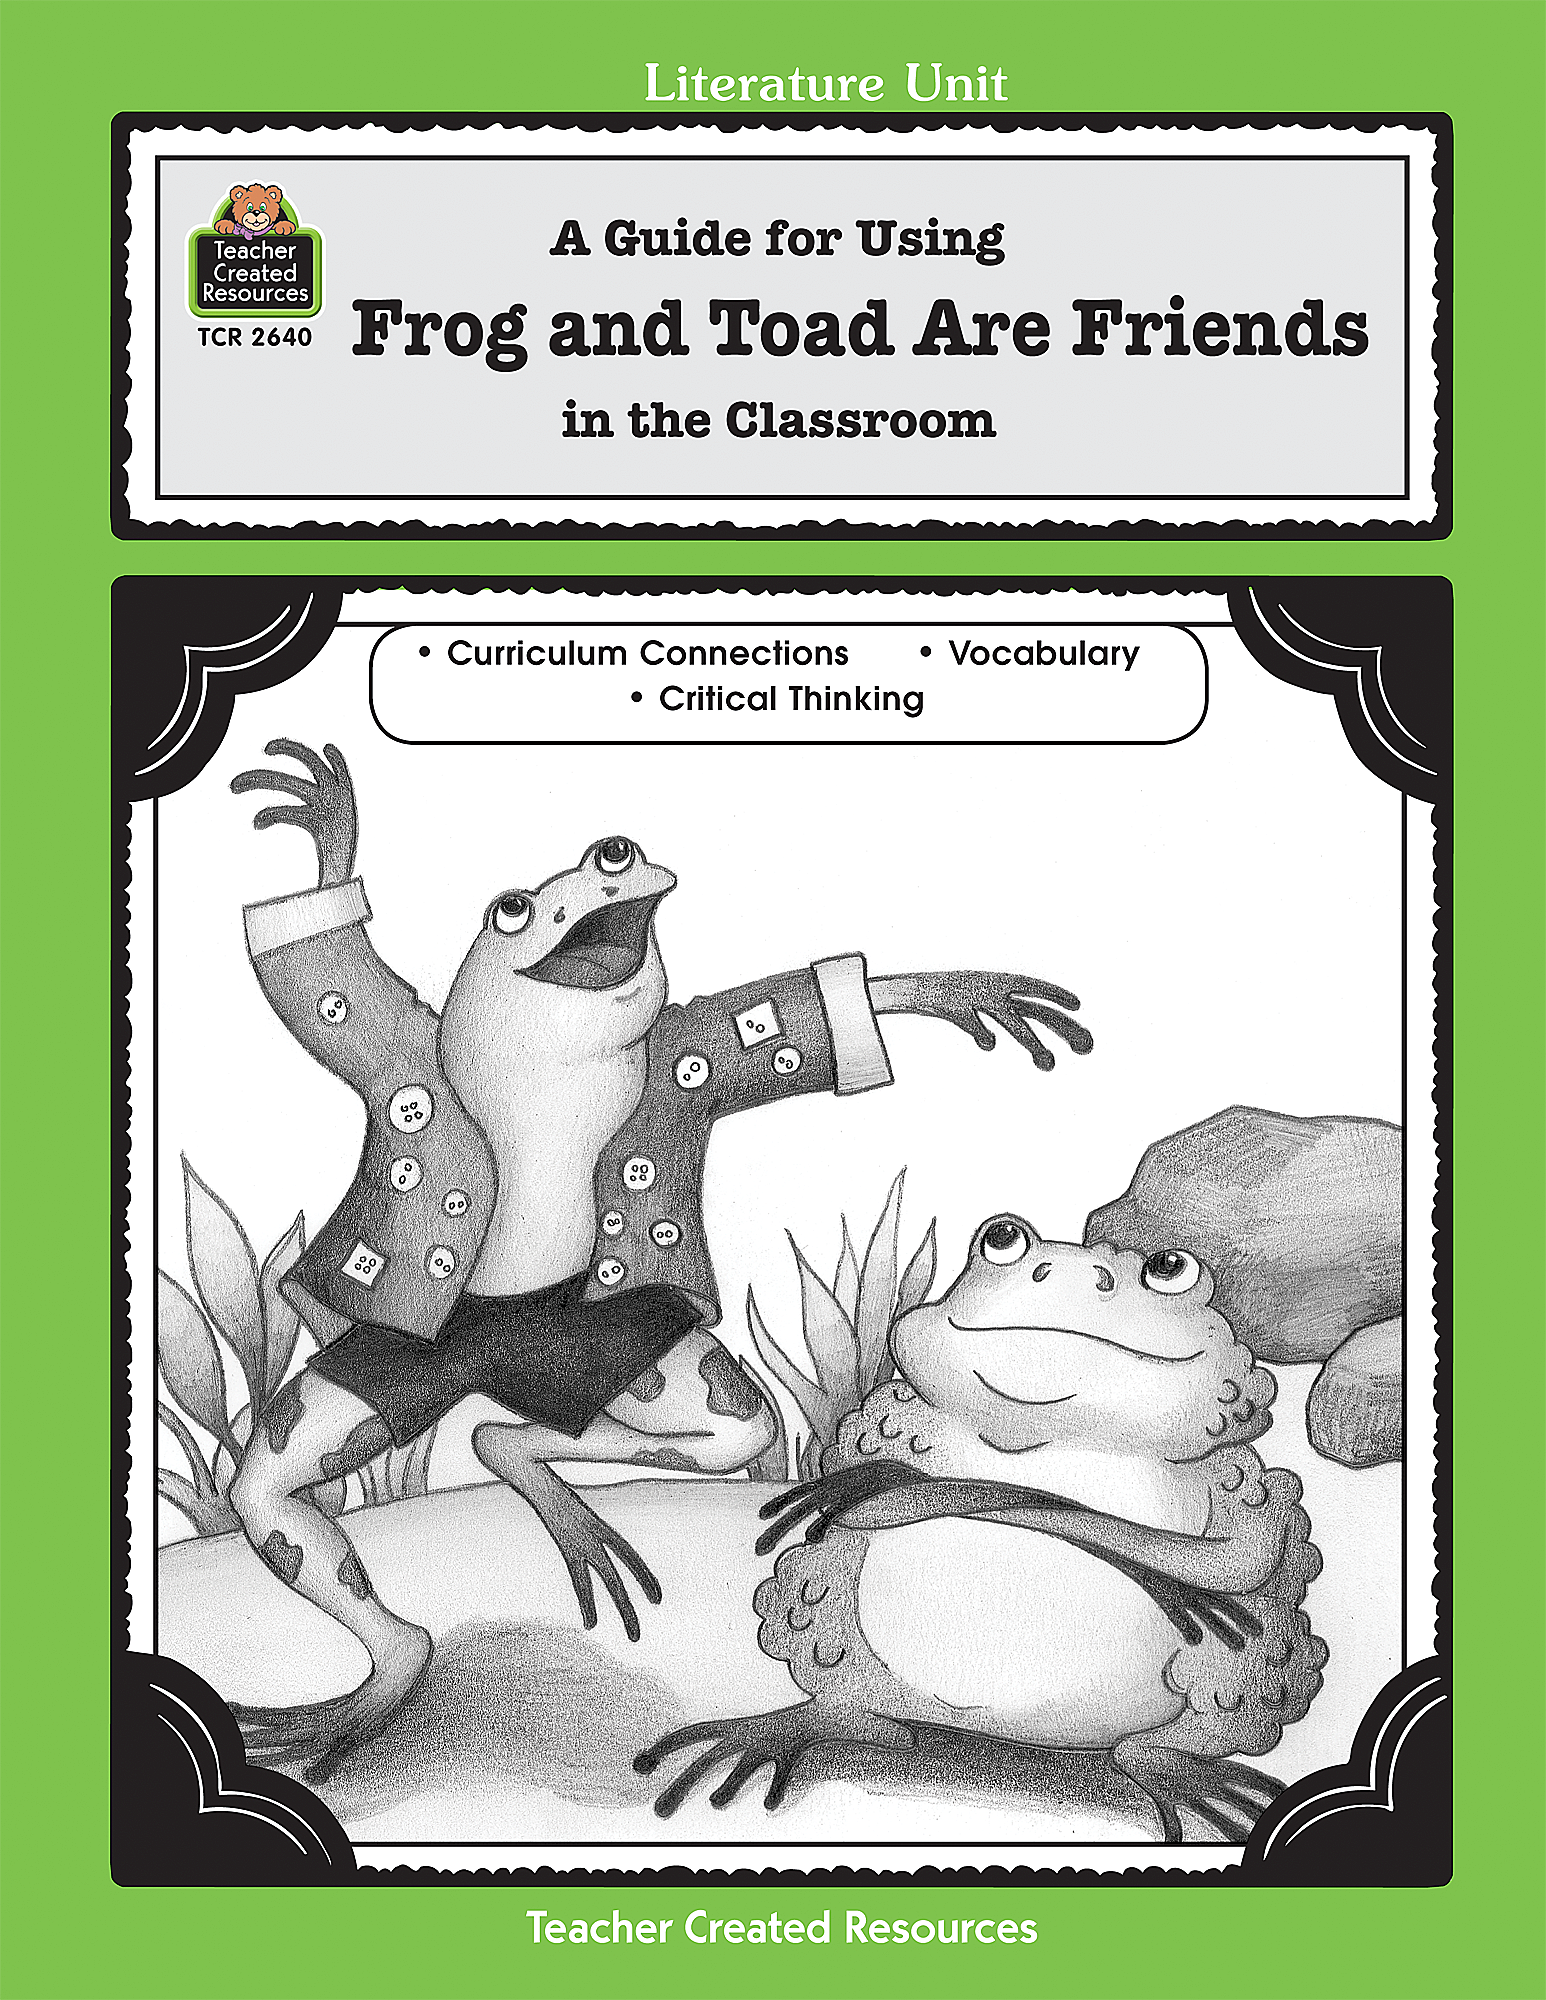 frog and toad are friends illustrations